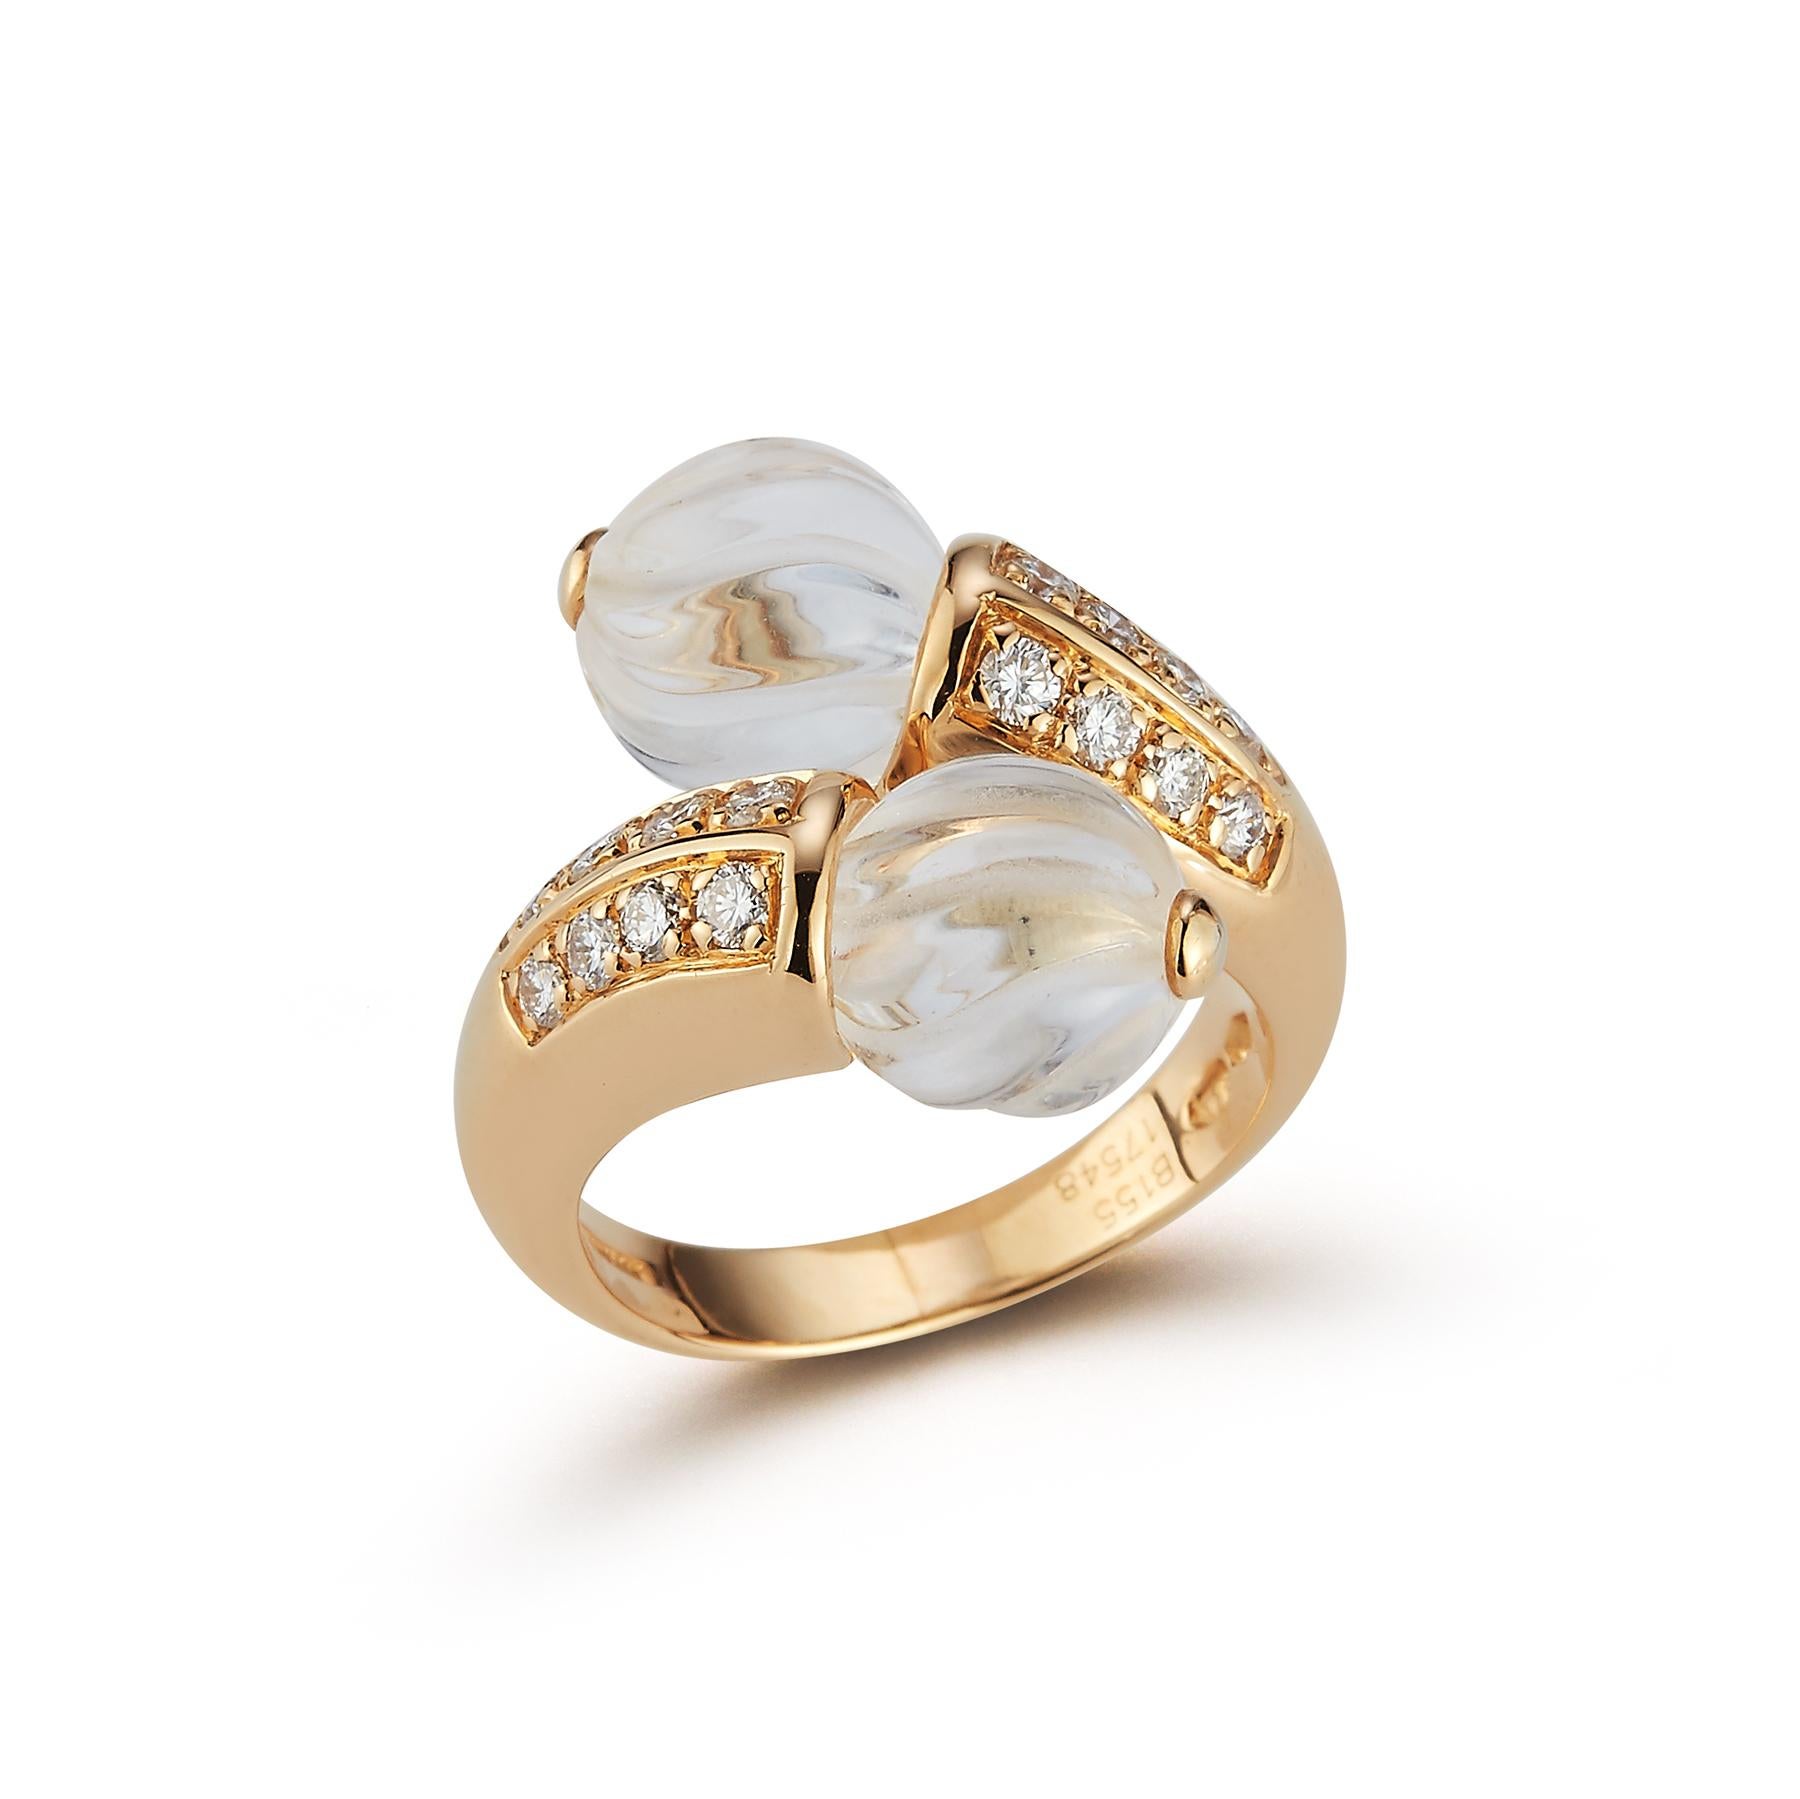 Boucheron Carved Rock Crystal & Diamond Crossover Ring , two rock crystals with round cut diamond approximately .32 cts set in 18k yellow gold 

Ring Size: 6.5

Resizable free of charge

Accompanied with original Boucheron box

